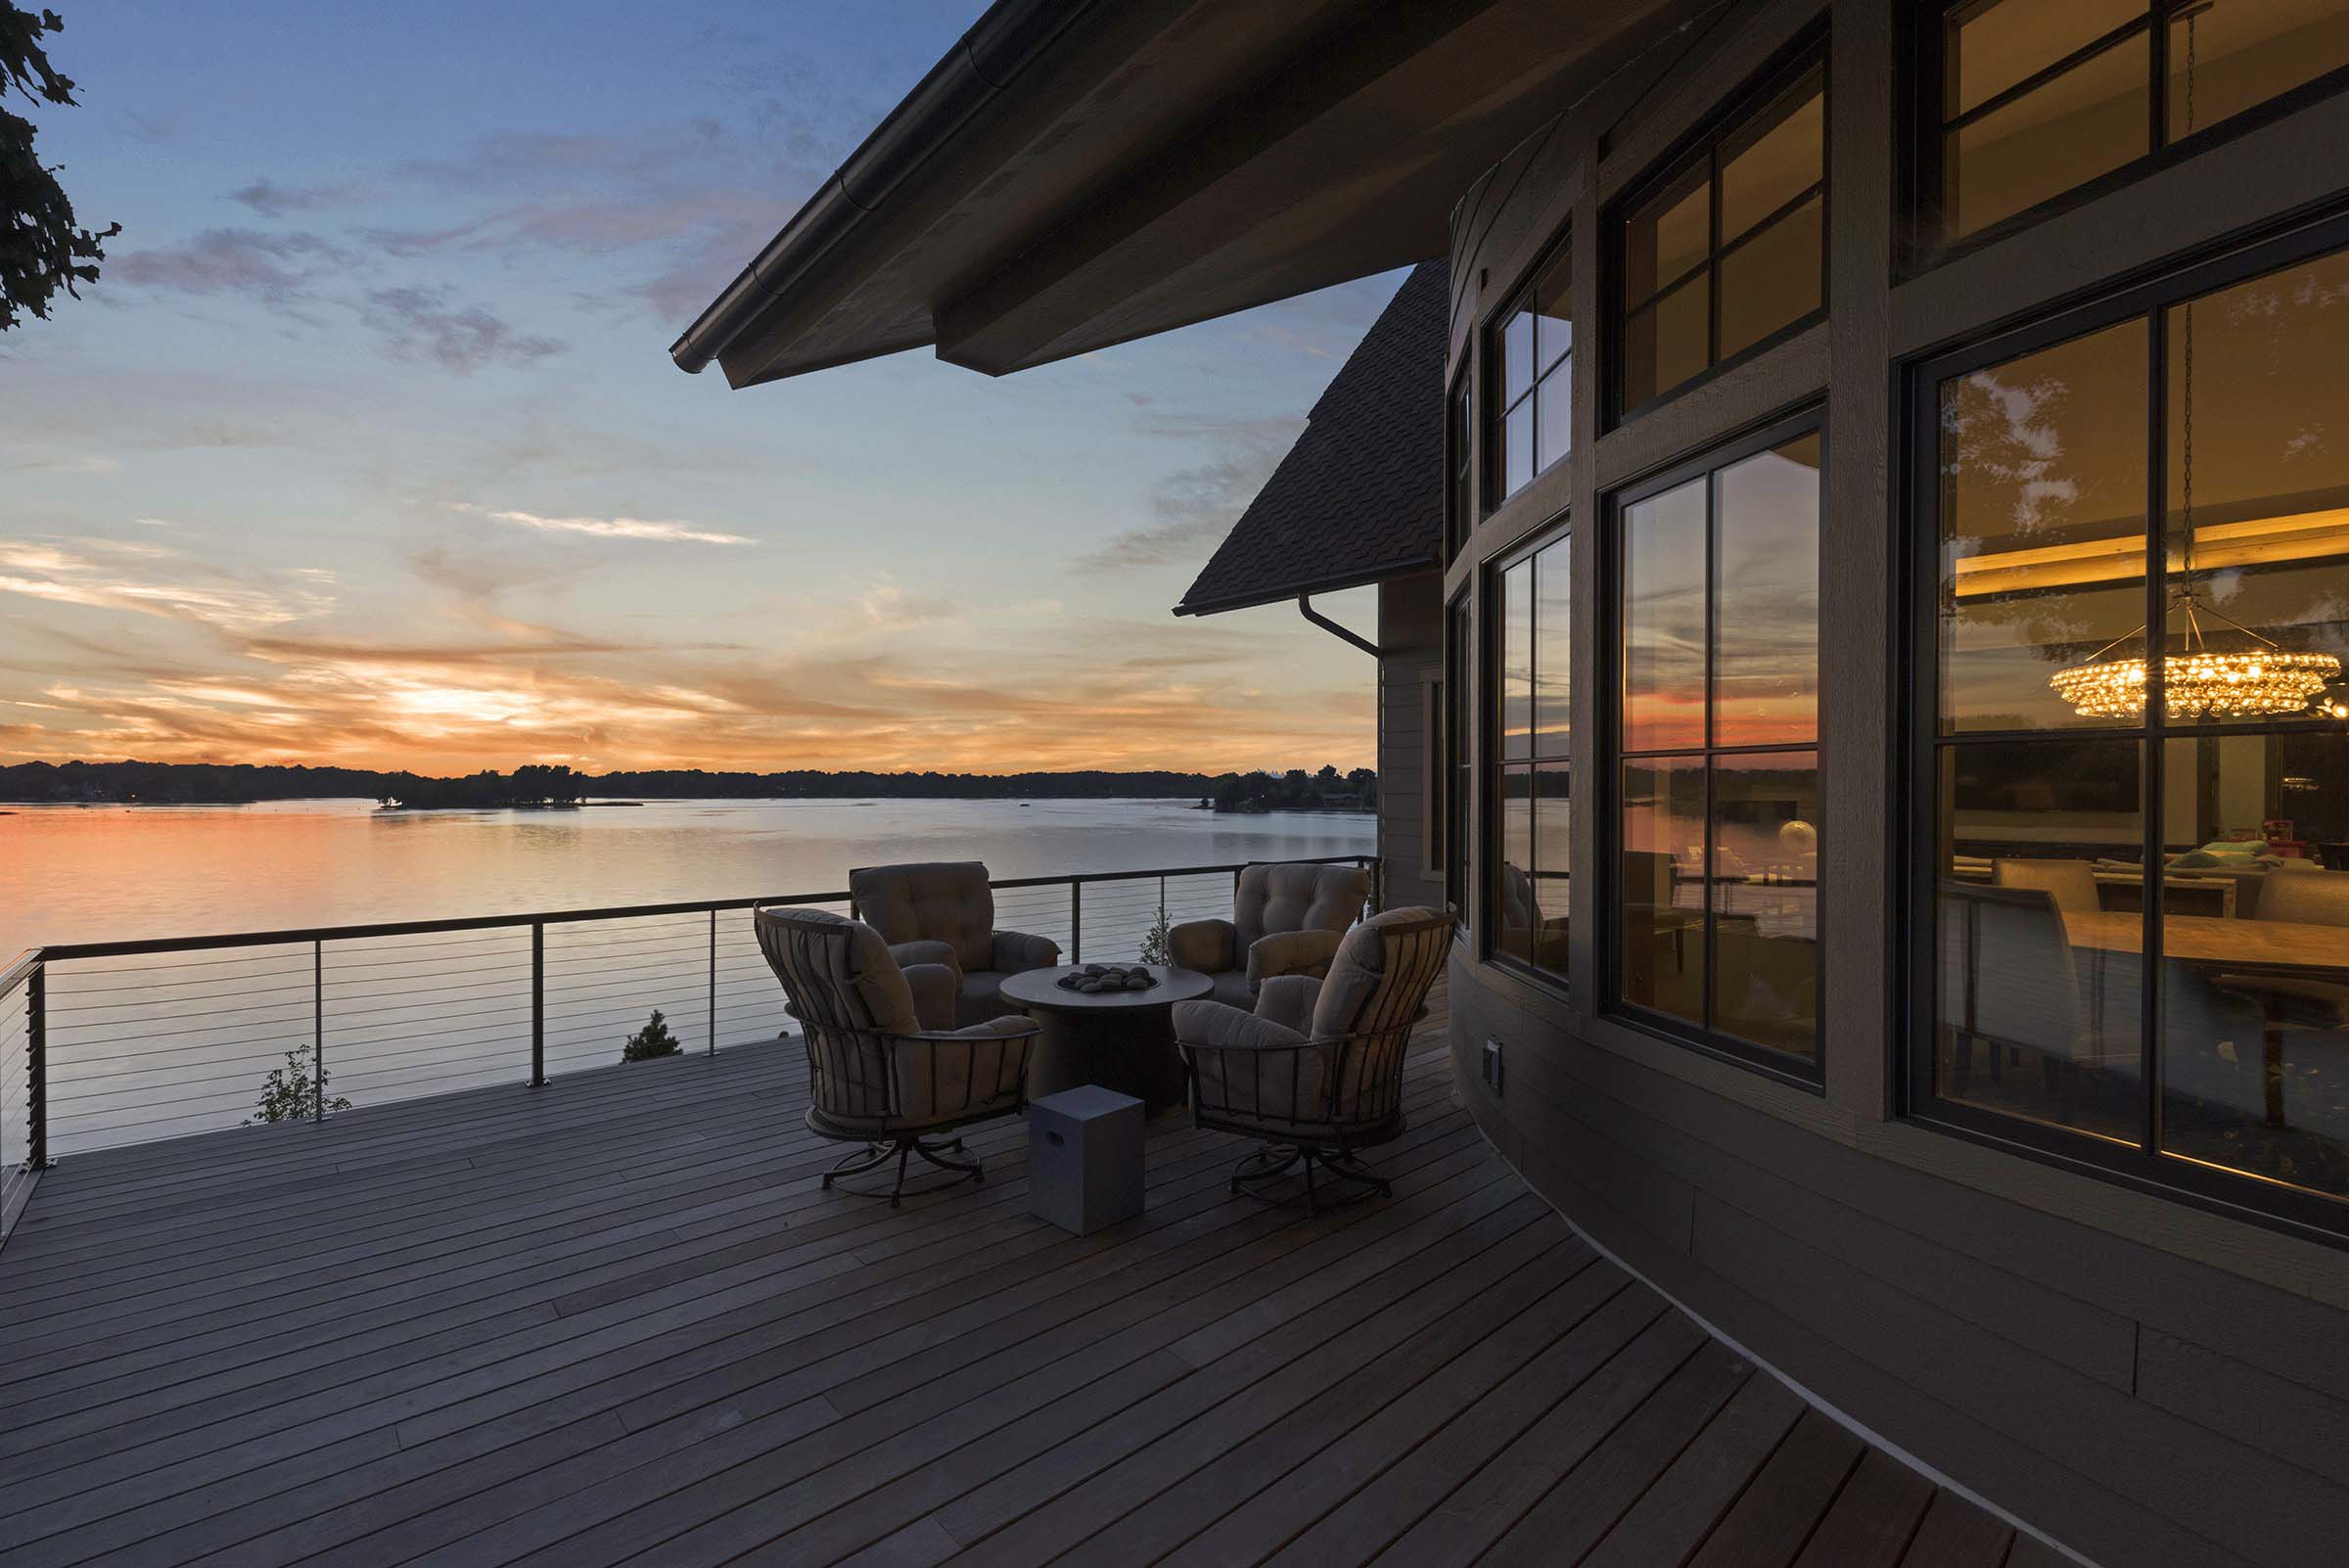 A tranquil deck overlooking a picturesque lake at sunset, offering inspiring home exterior design ideas.